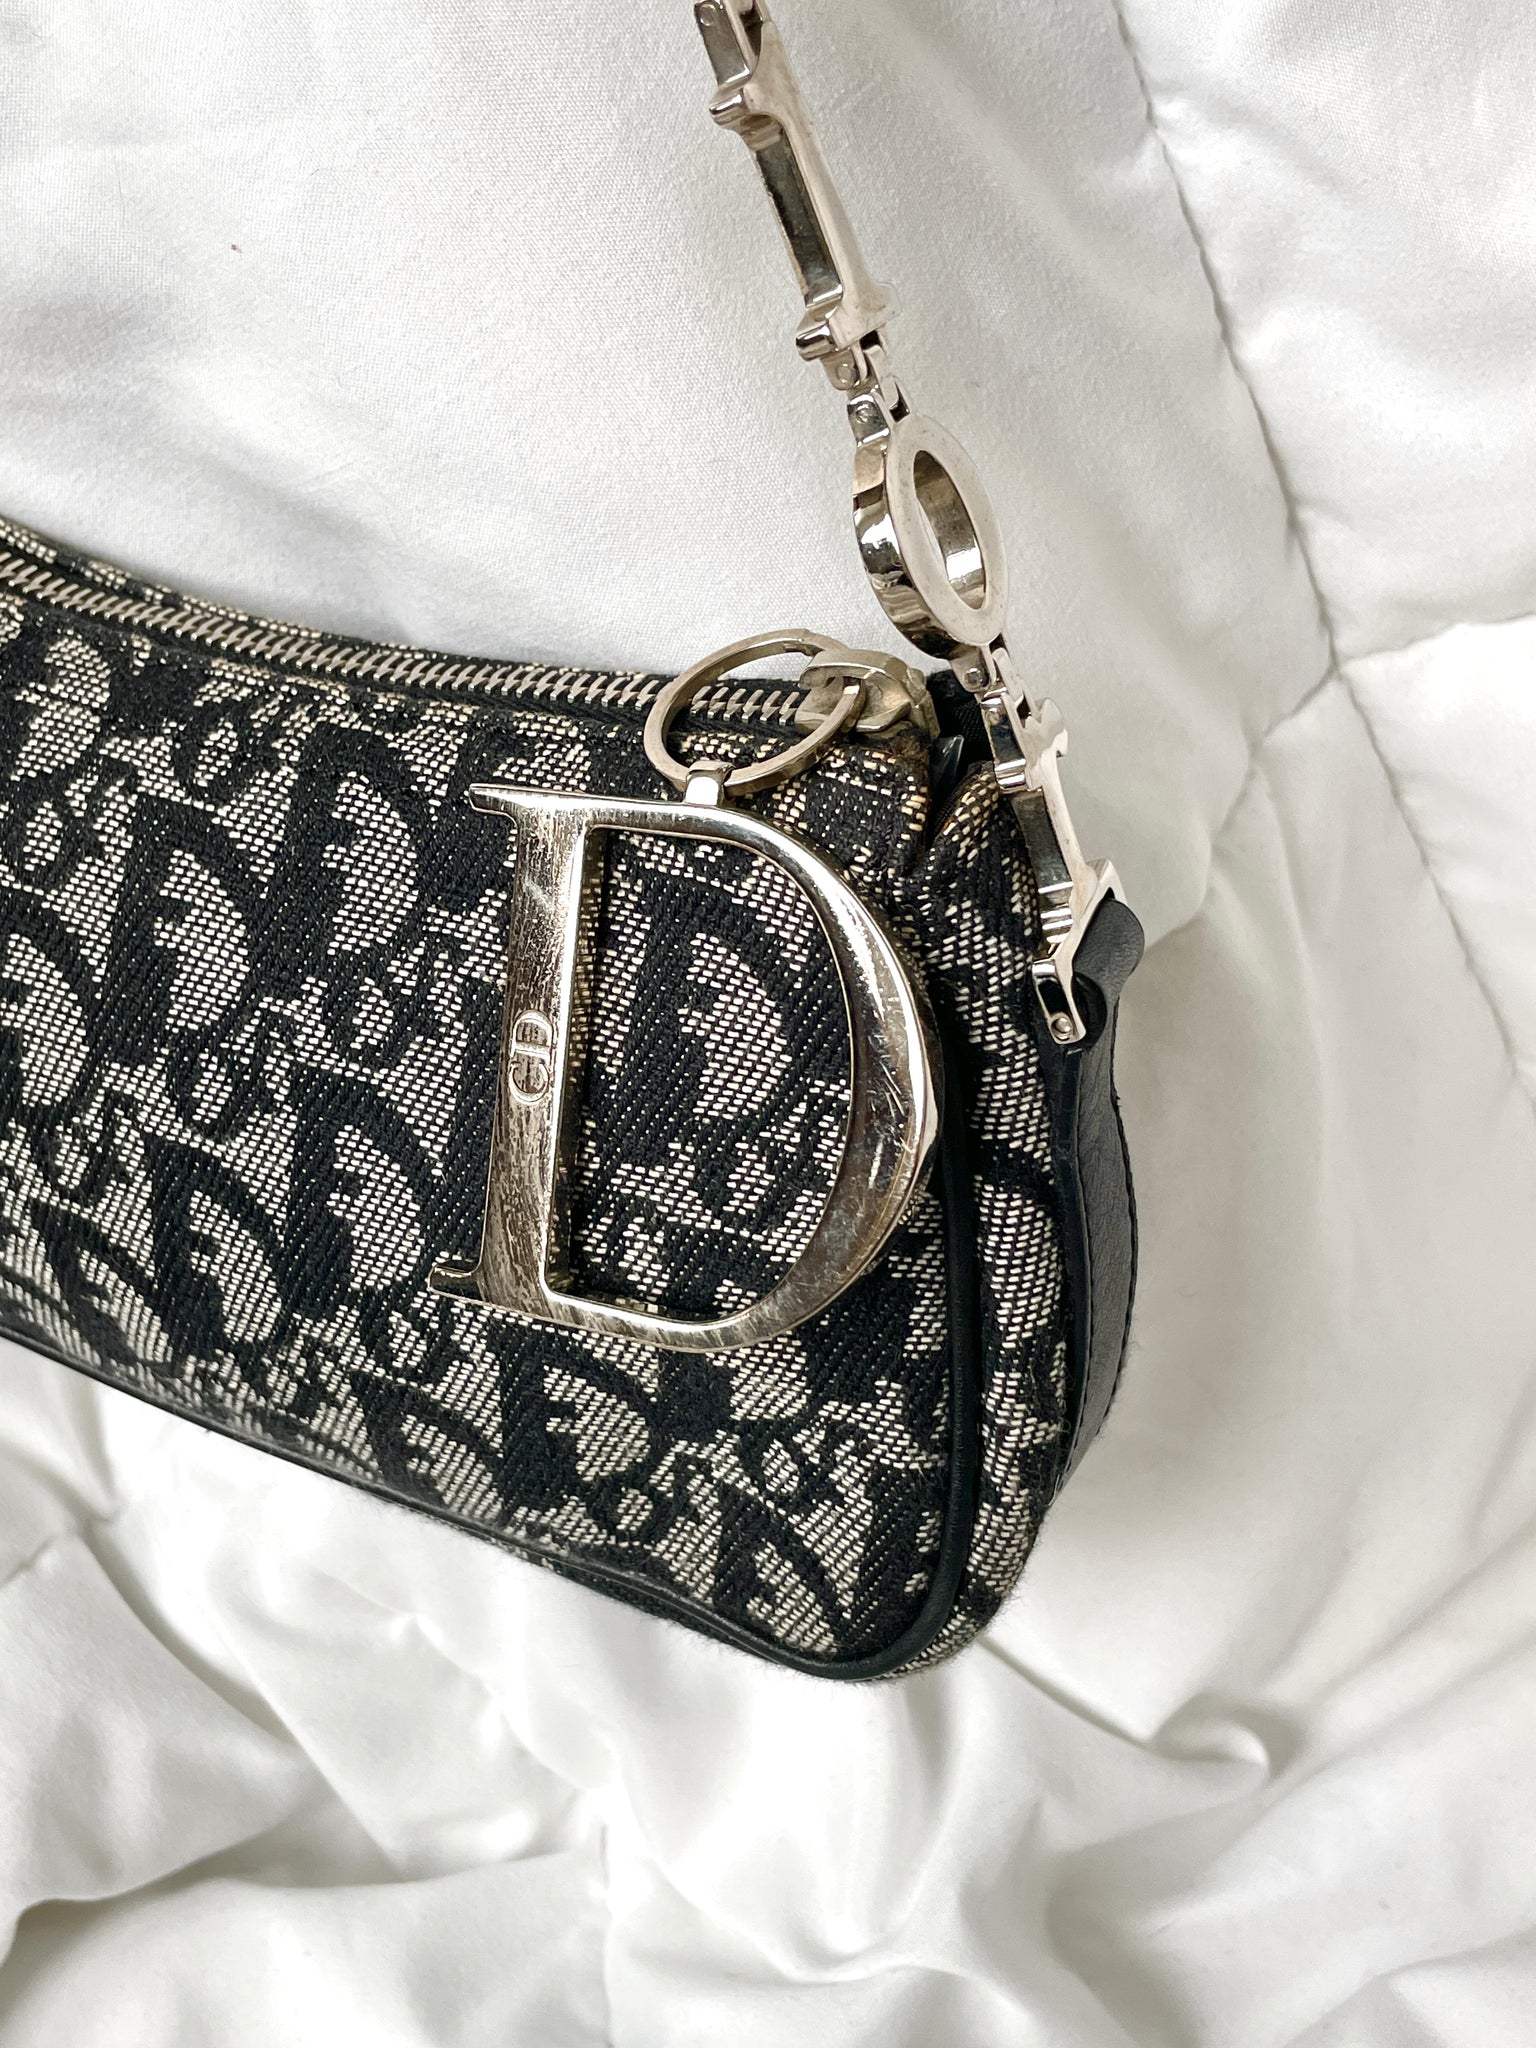 Extremely Rare Dior Trotter Bag